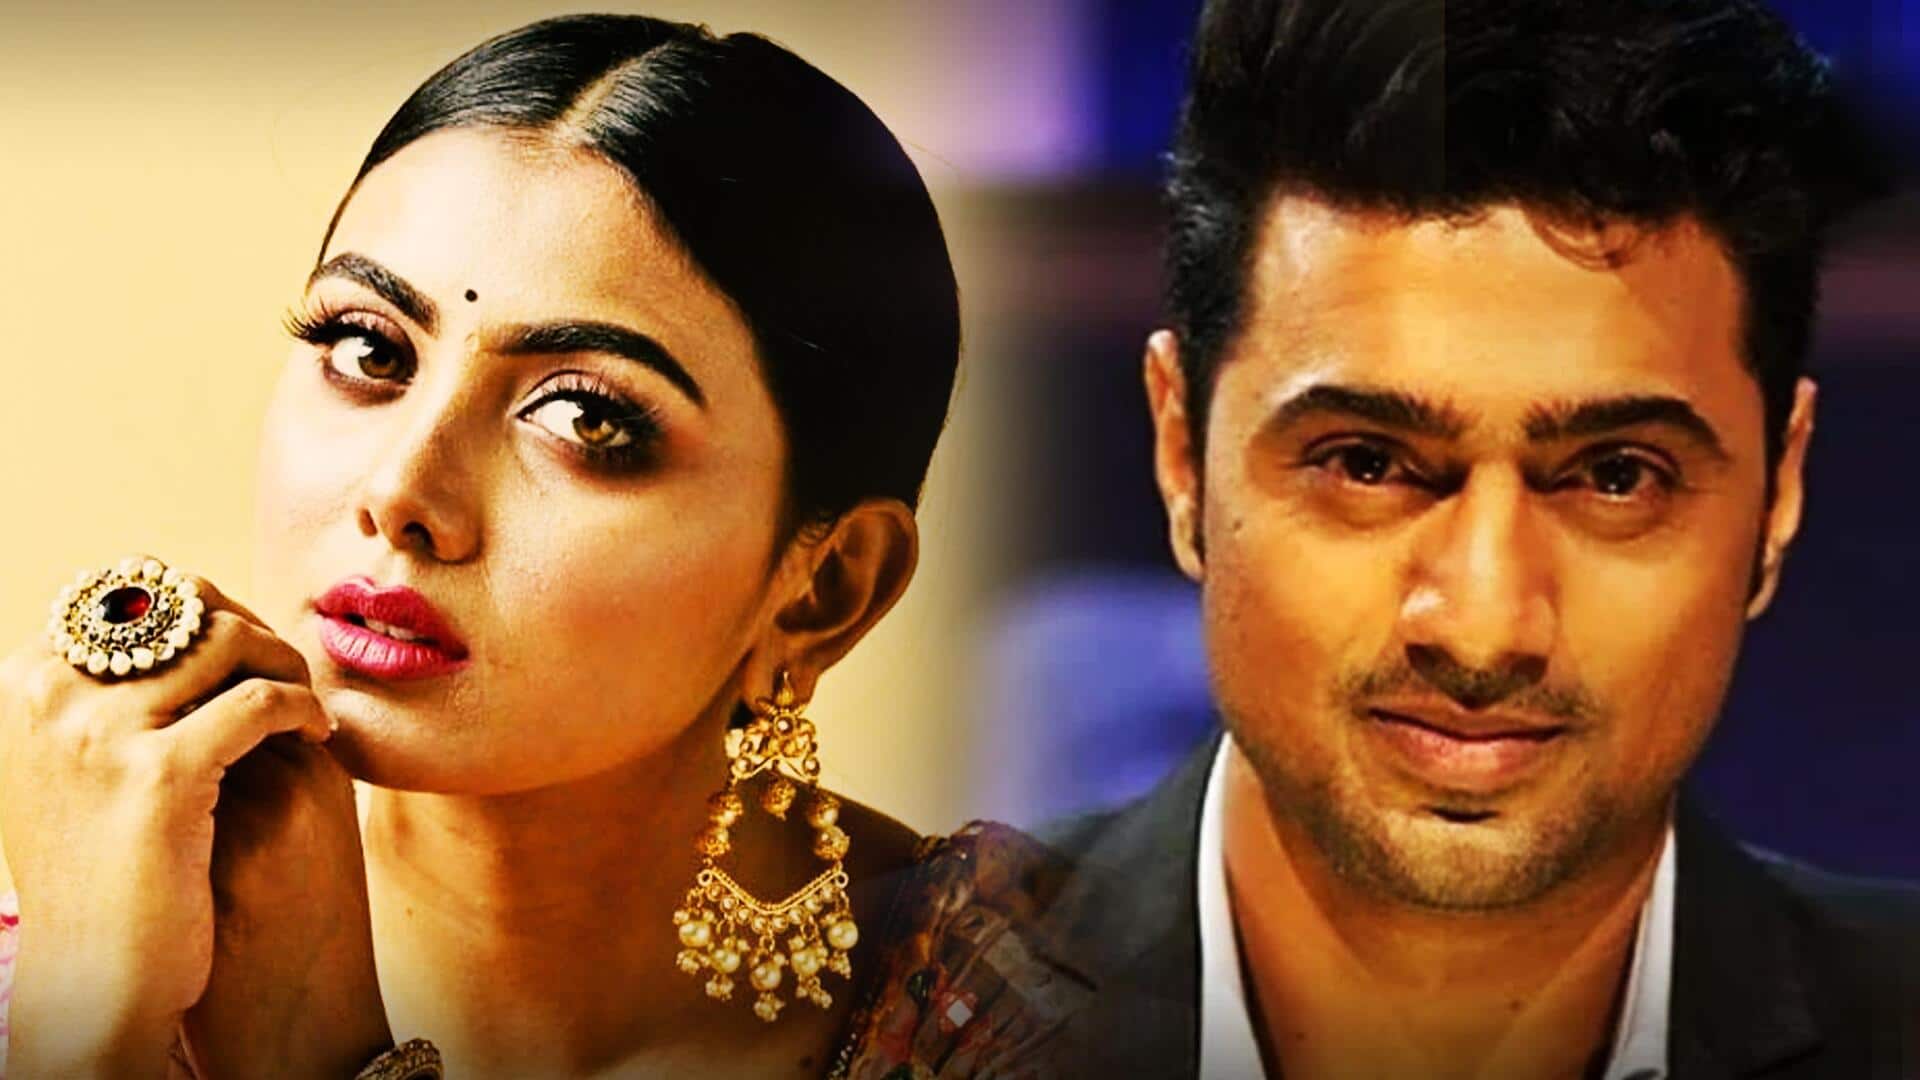 NewsBytes Exclusive: Who will star alongside Dev in 'Khadaan'